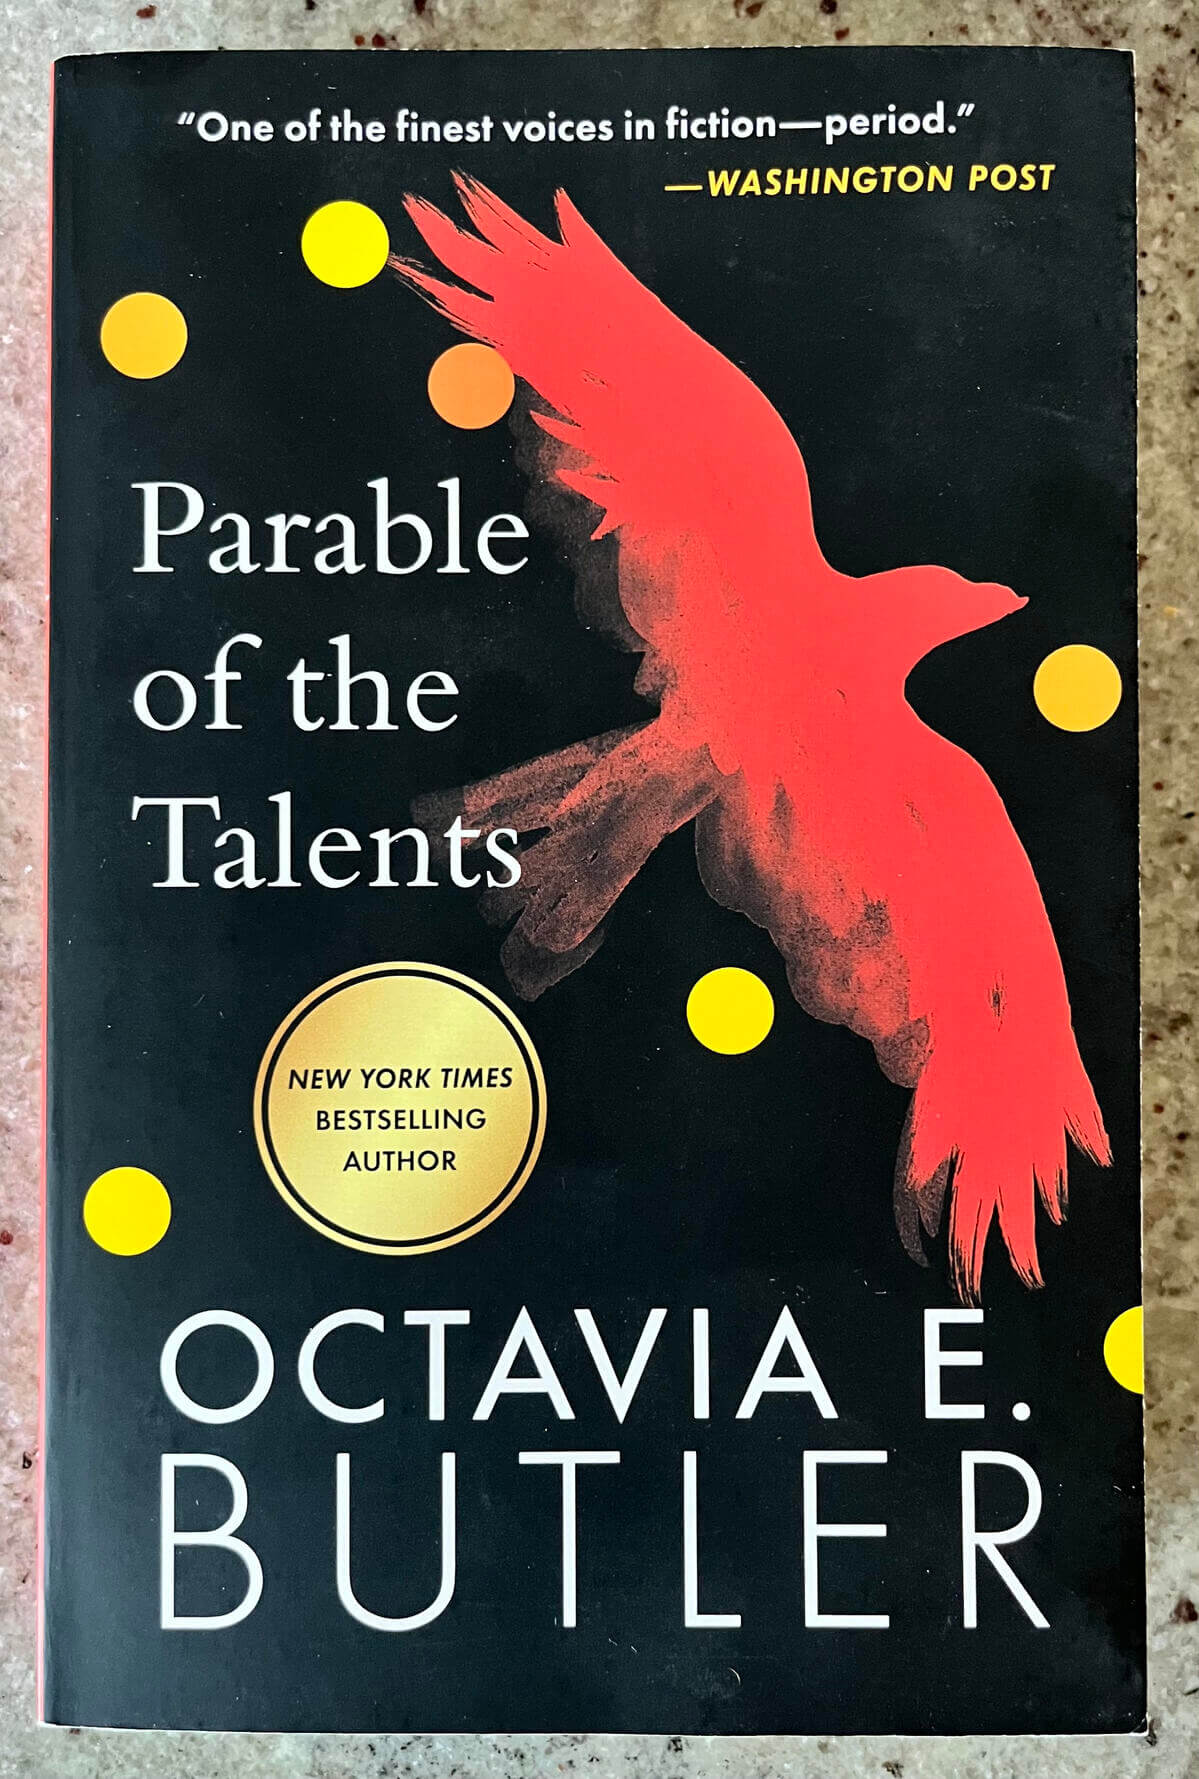 “Parable of the Talents” by Octavia E. Butler.